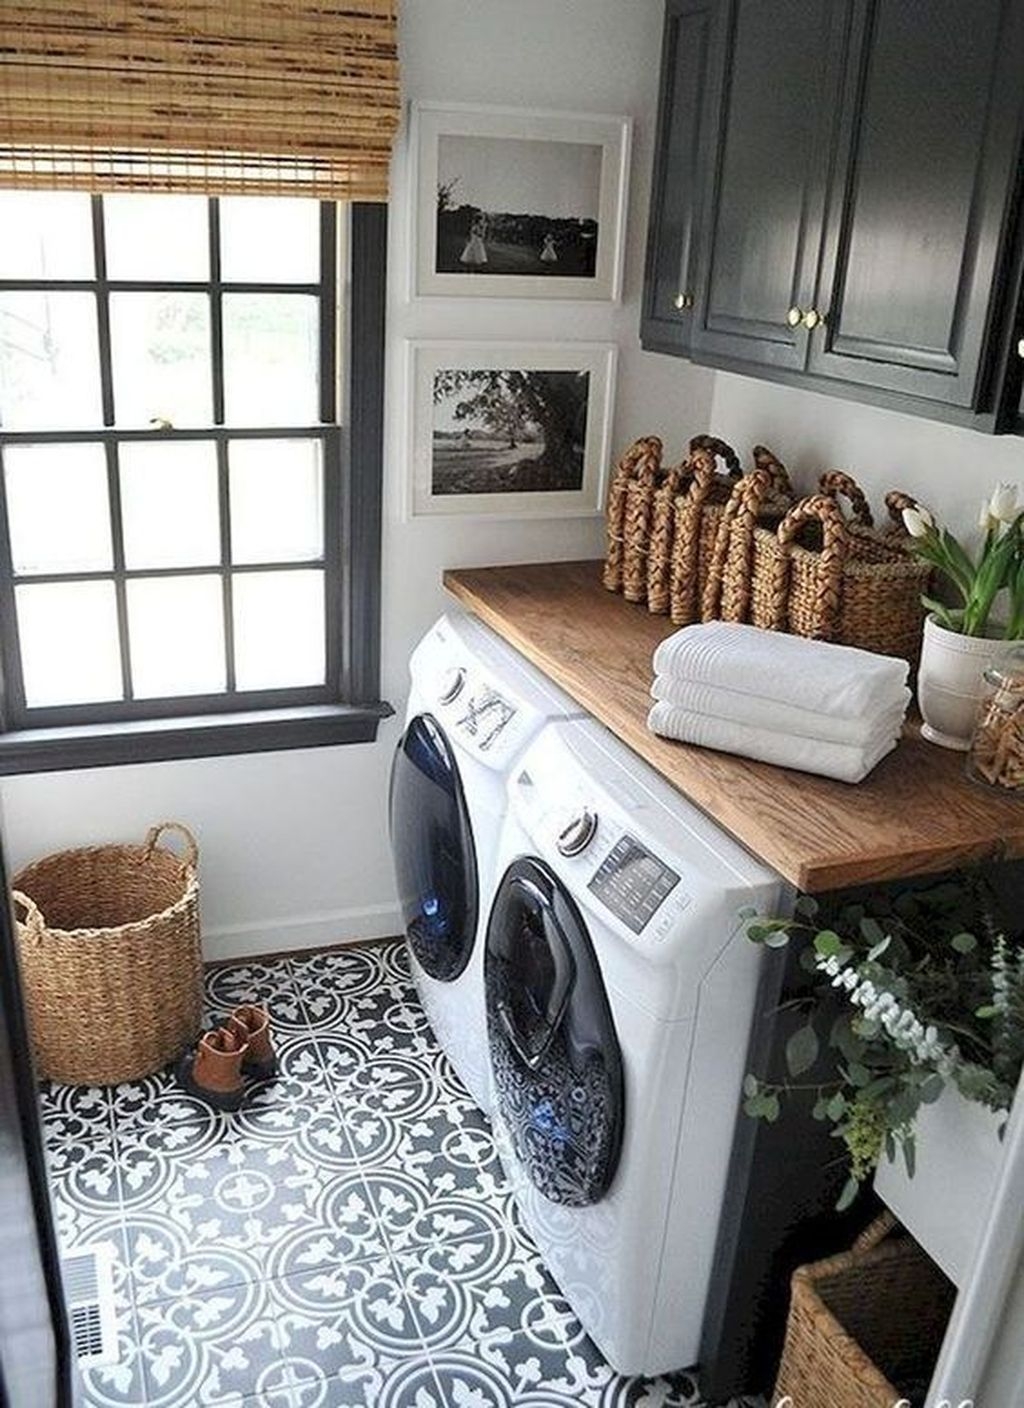 50 Small Laundry Room Design Ideas to Try - SWEETYHOMEE